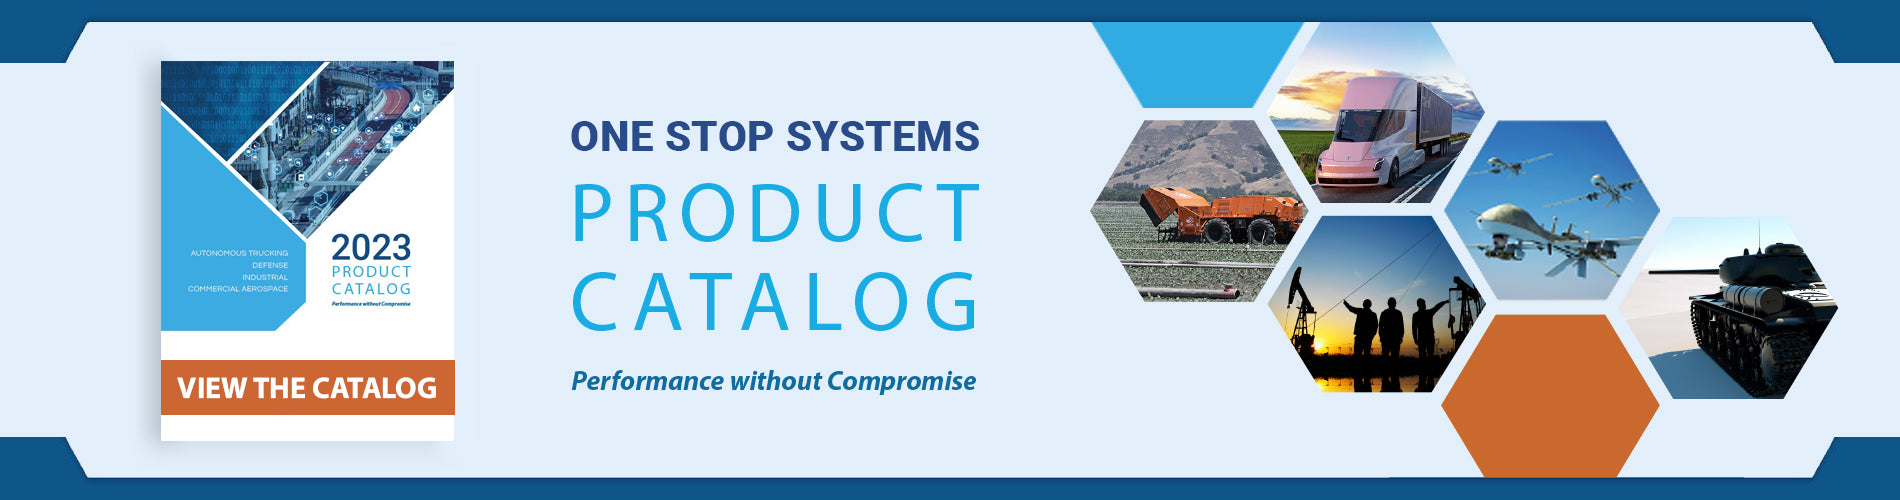 One Stop Systems Product Catalog